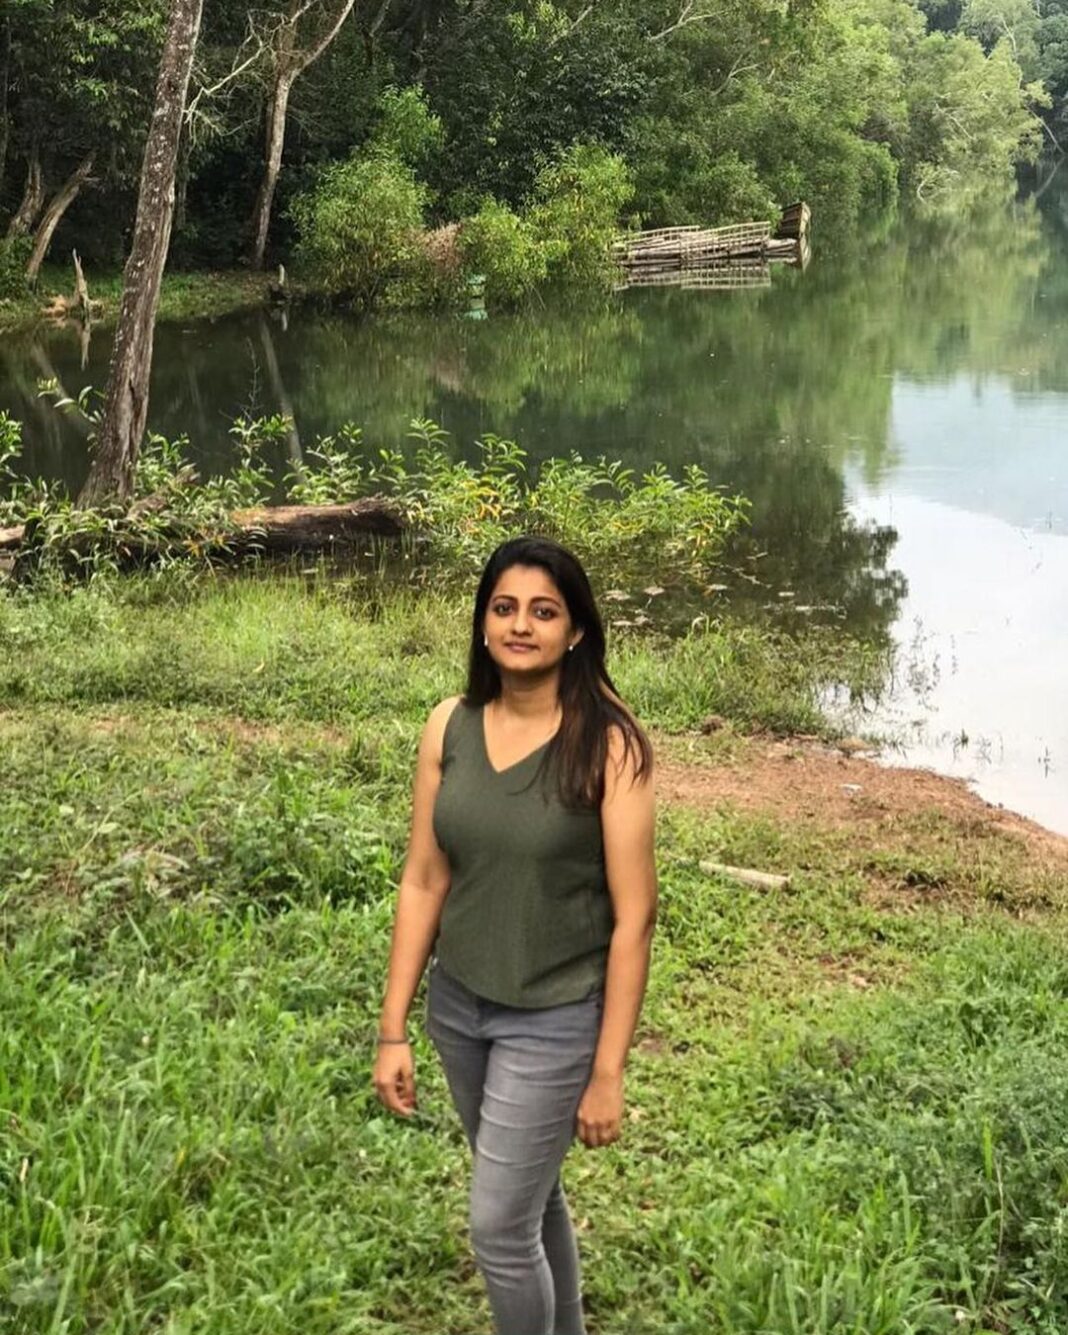 Priyanka Nair Instagram - The Earth has music for those who listen.🎼🎼 - - - #nature#naturelove#naturephotography#music#priyanka#priyankanair#actor#actress#trivandrum#kerala#insta#collywood#hollywood#bollywood#instatime#instapic#instagram